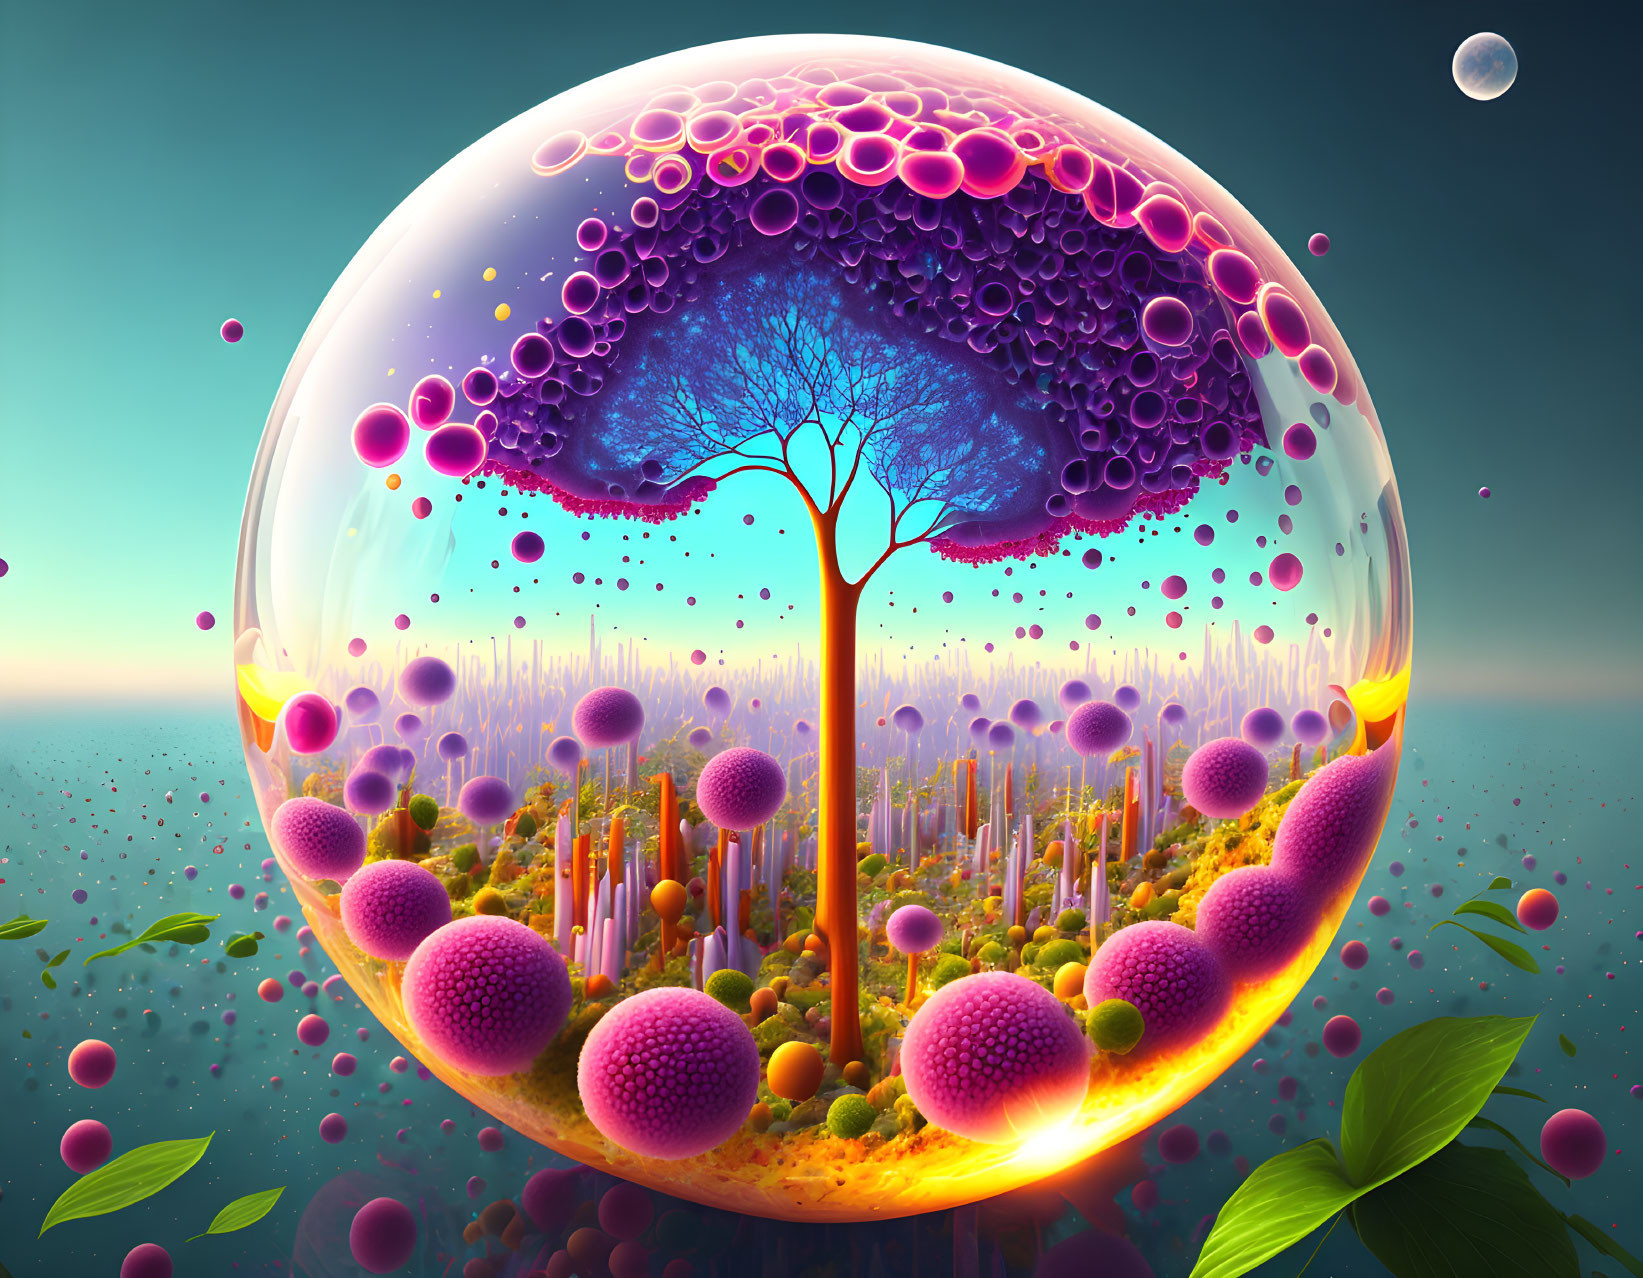 Colorful surreal artwork: Tree in transparent bubble with vibrant orbs & fantastical vegetation